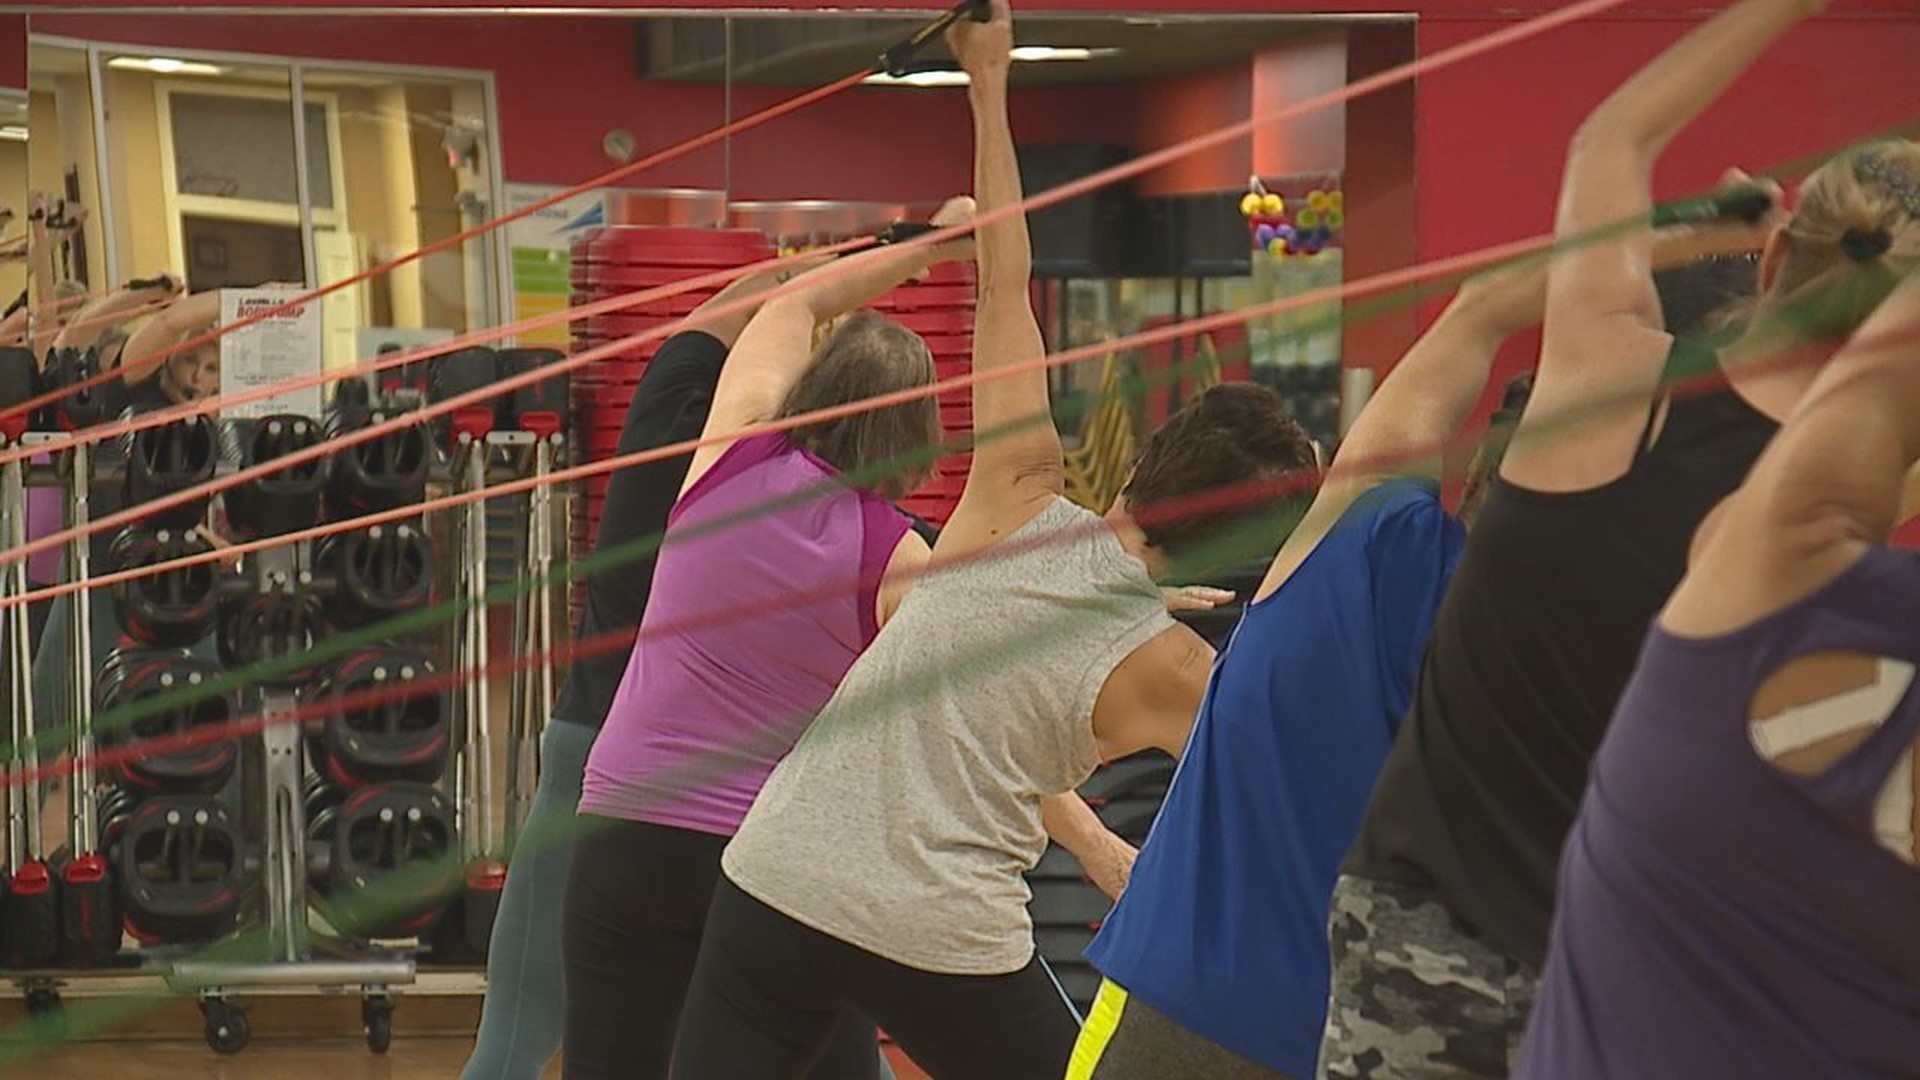 Reestablishing connections at the gym is one of the biggest trends for fitness goers this year.